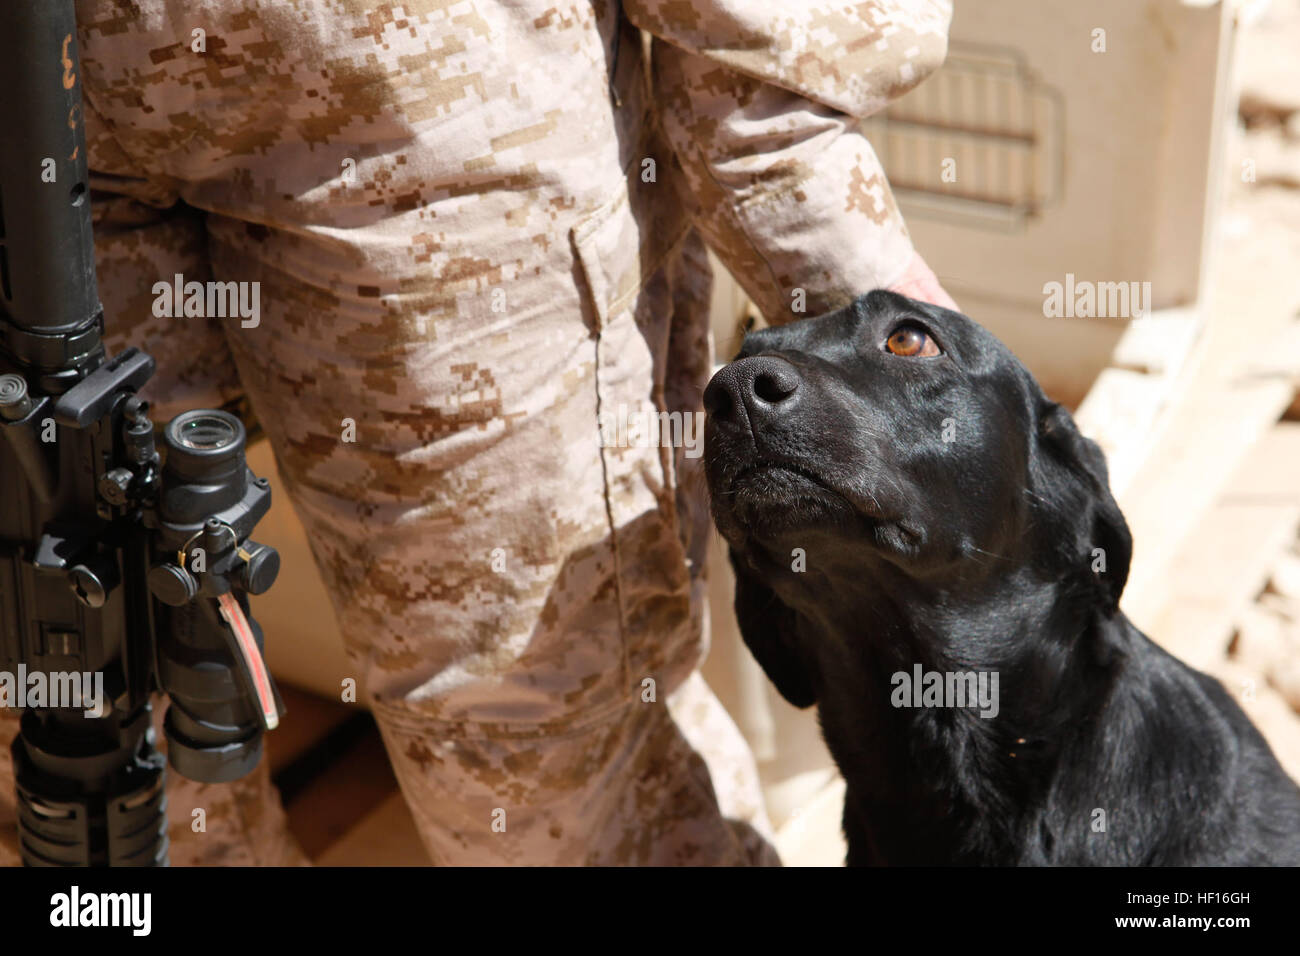 U.S. Marine Sgt. Maj. Lisa K. Nilsson, sergeant major, 2nd Marine Aircraft Wing (2d MAW) Forward, pets a military working dog, Patrol Base Boldak, Helmand Province, Afghanistan, March 6, 2013. The 2d MAW (FWD) command element visited and introduced themselves to units at Boldak. (U.S. Marine Corps photo by Cpl. Ashley E. Santy/Released) 2d MAW (FWD) Command Element Introduction 130306-M-BU728-127 Stock Photo